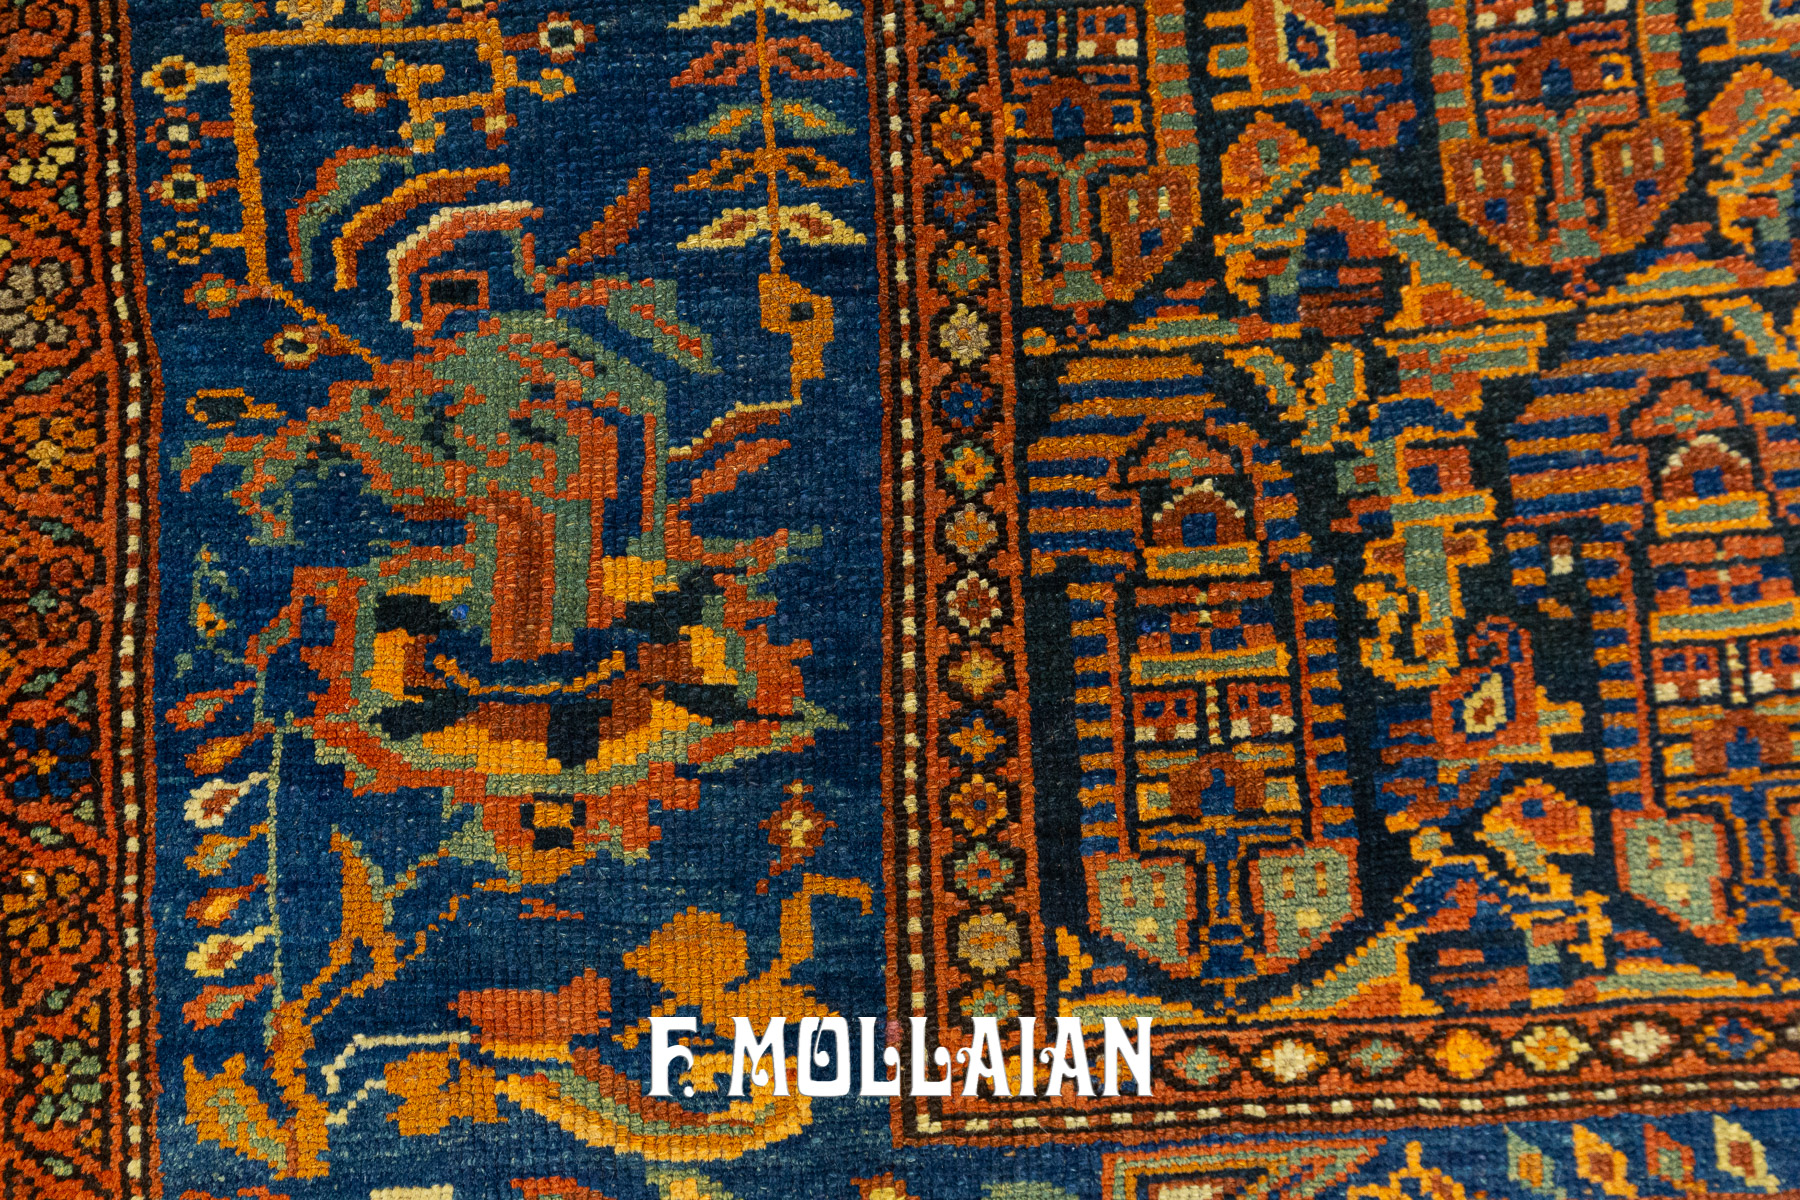 All-over Antique Persian Malayer Rug with “Bothe” design n°:67329106